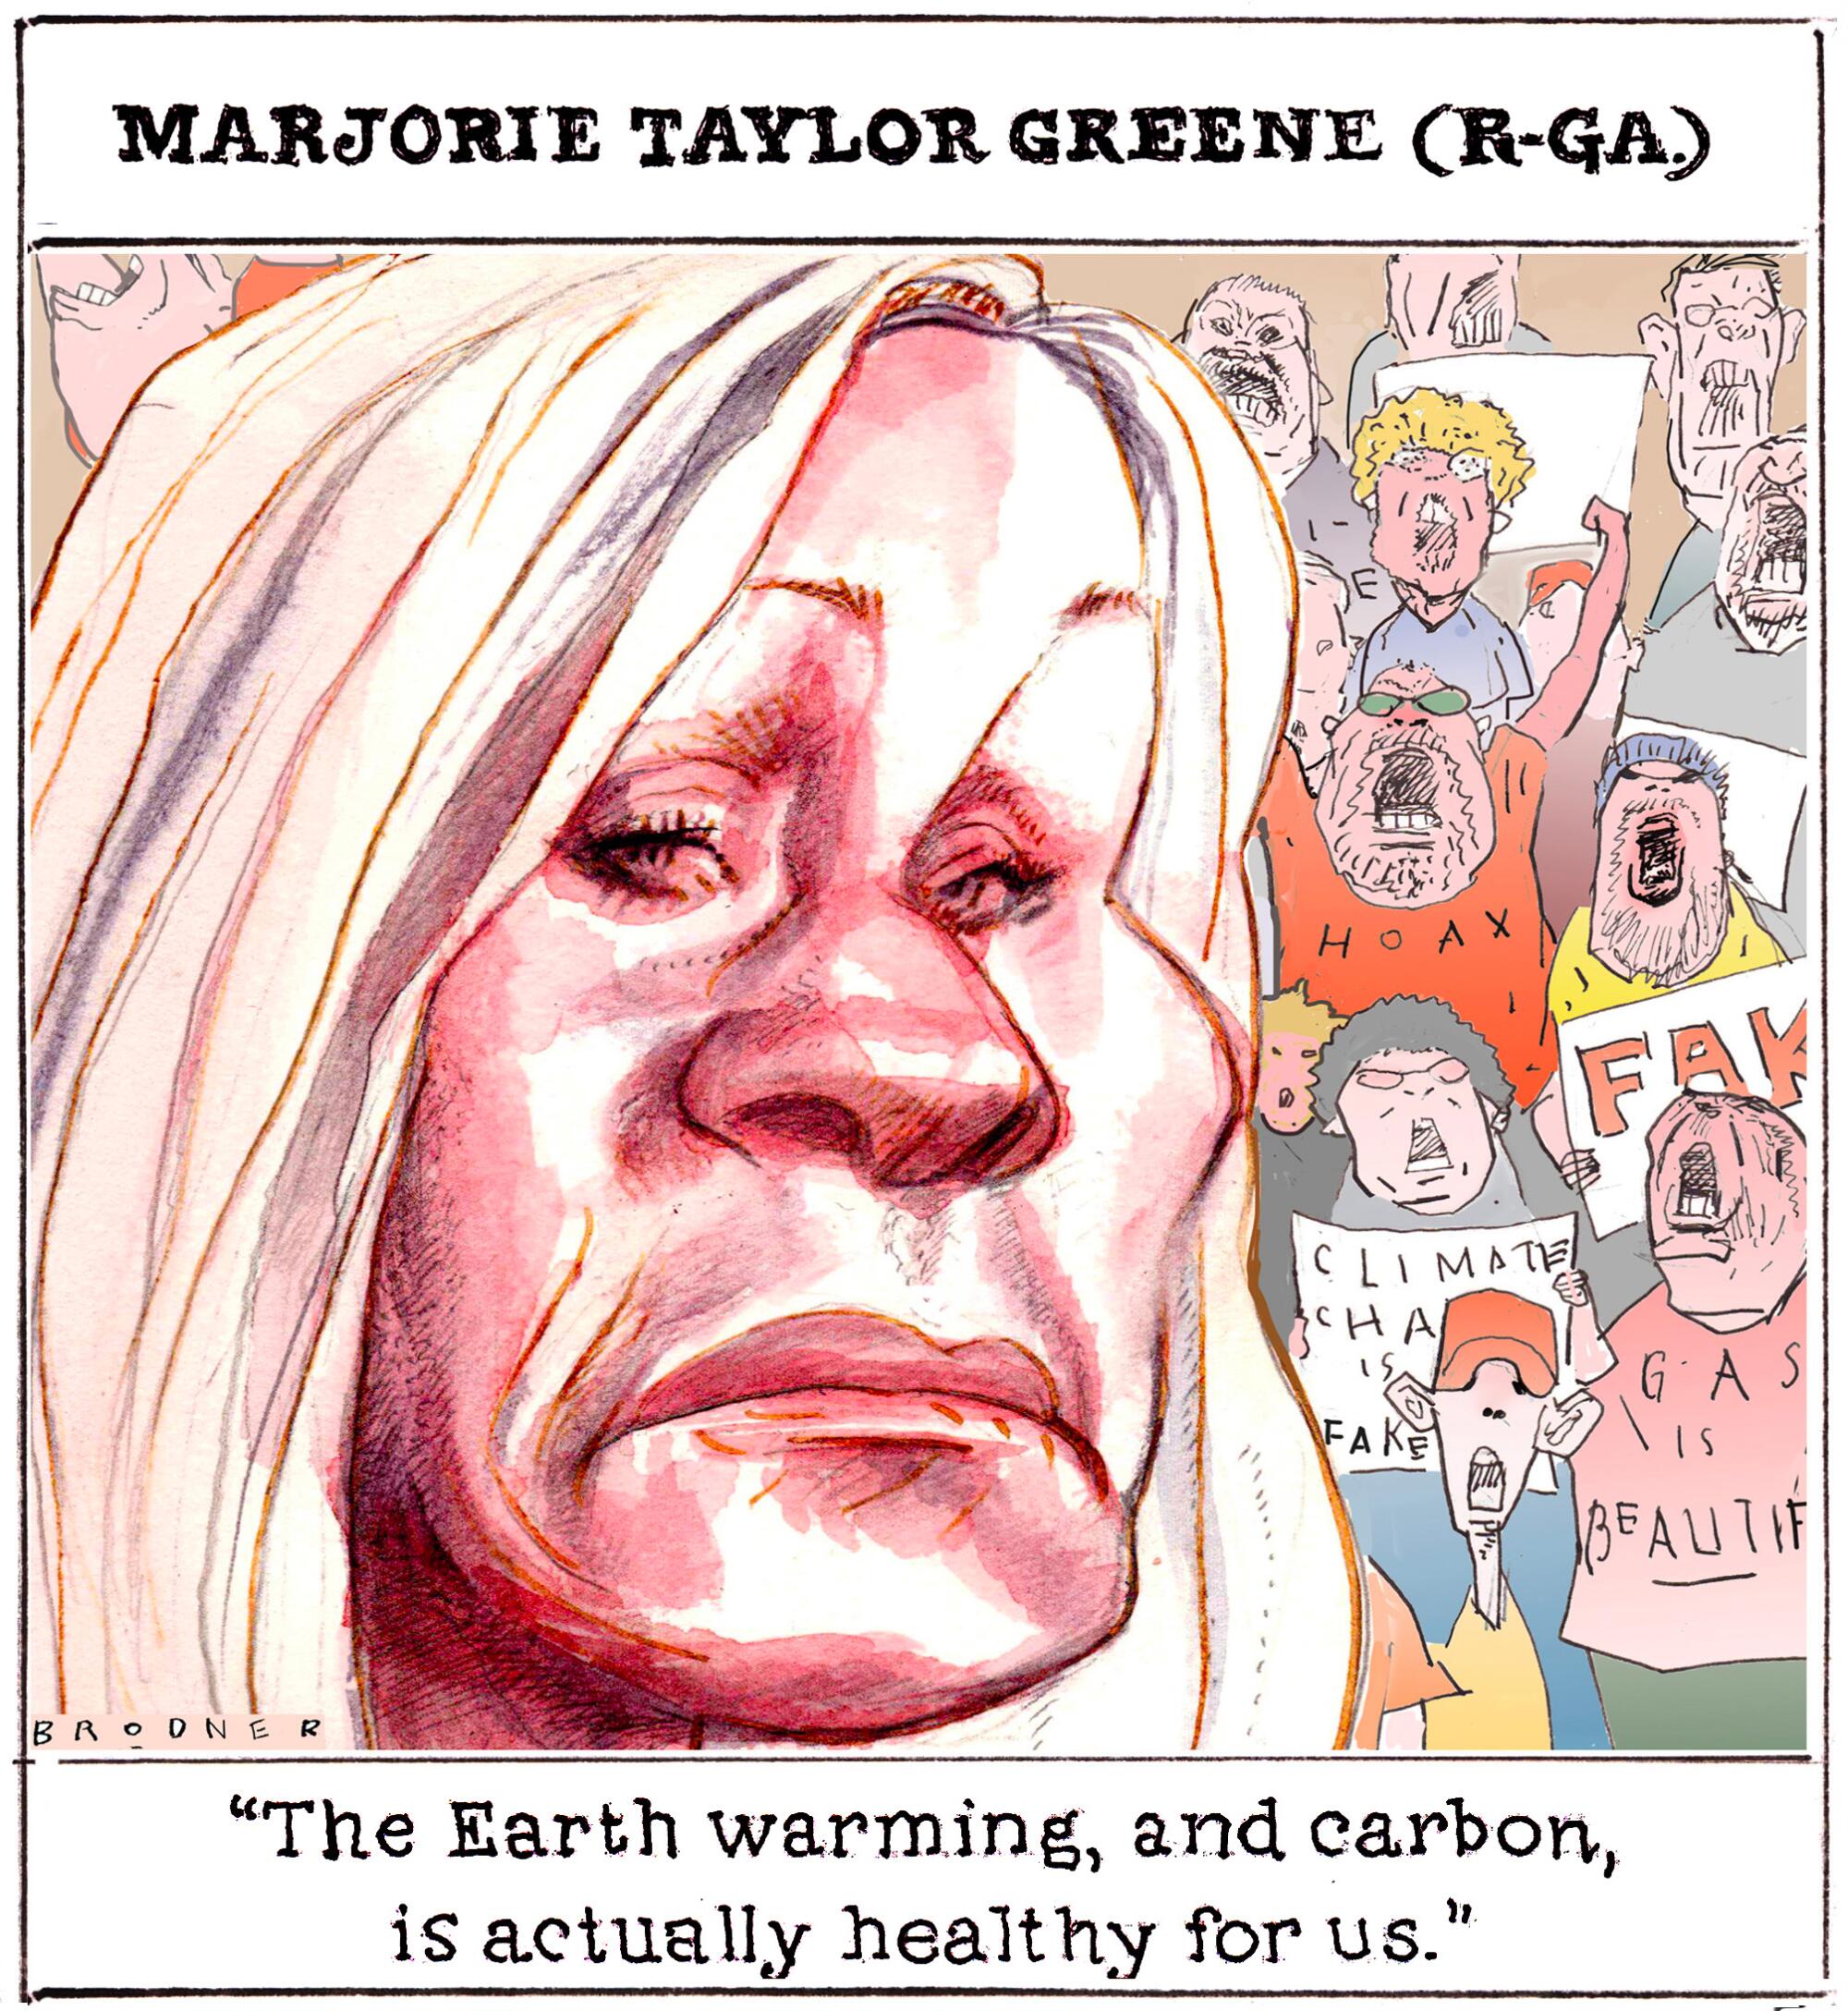 Marjorie Taylor Greene (R-Ga.) "The Earth warming, and carbon, is actually healthy for us."